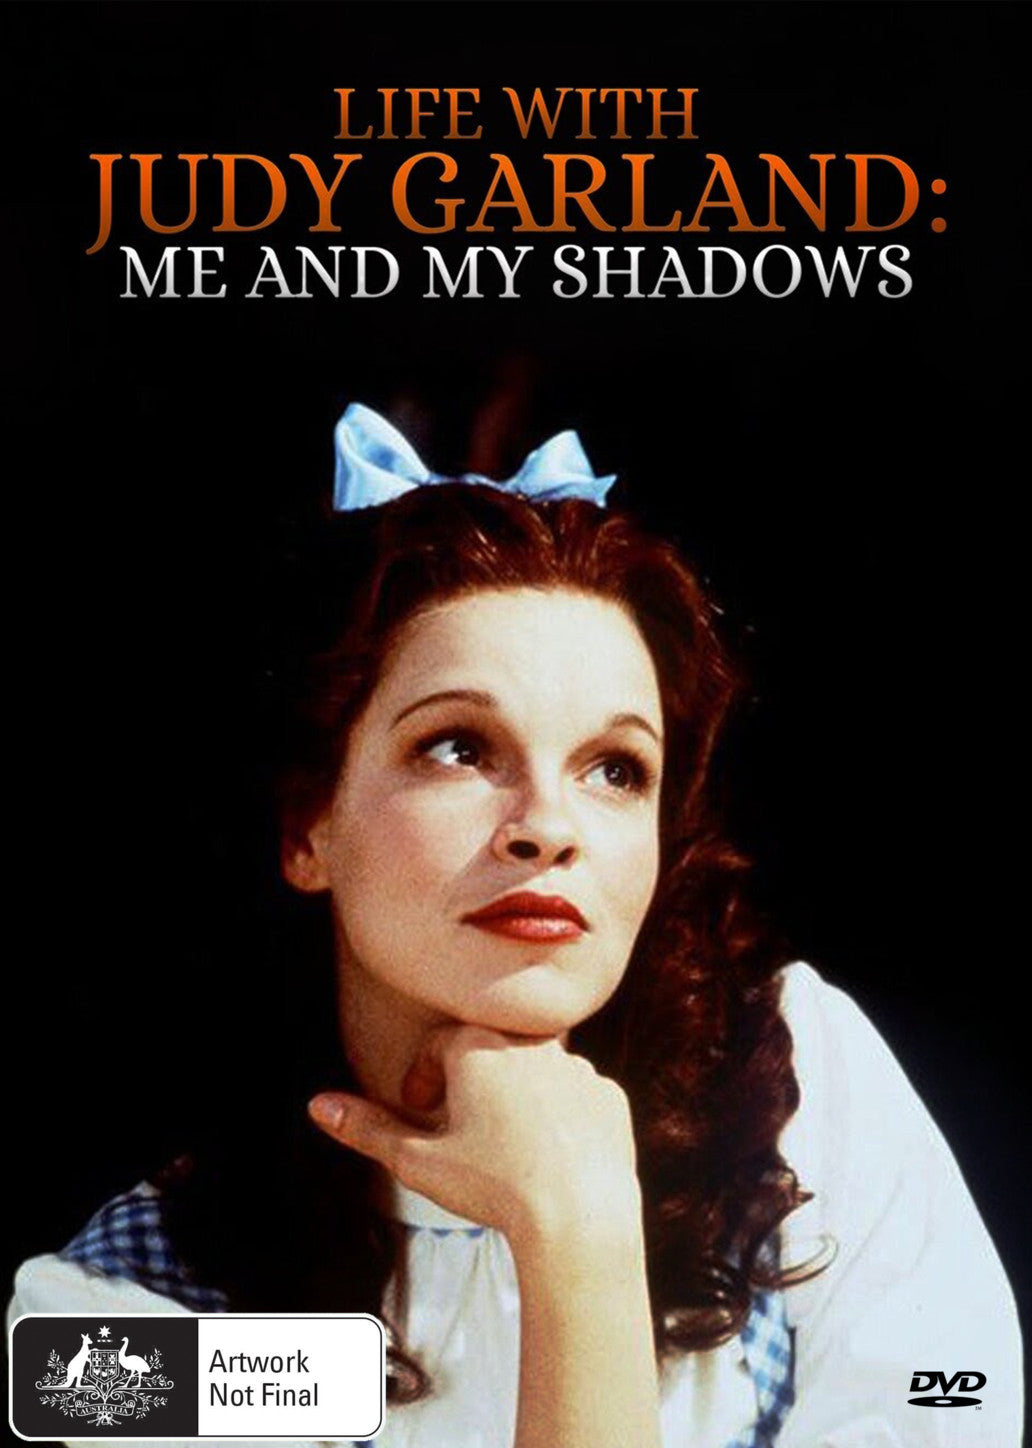 LIFE WITH JUDY GARLAND: ME AND MY SHADOWS